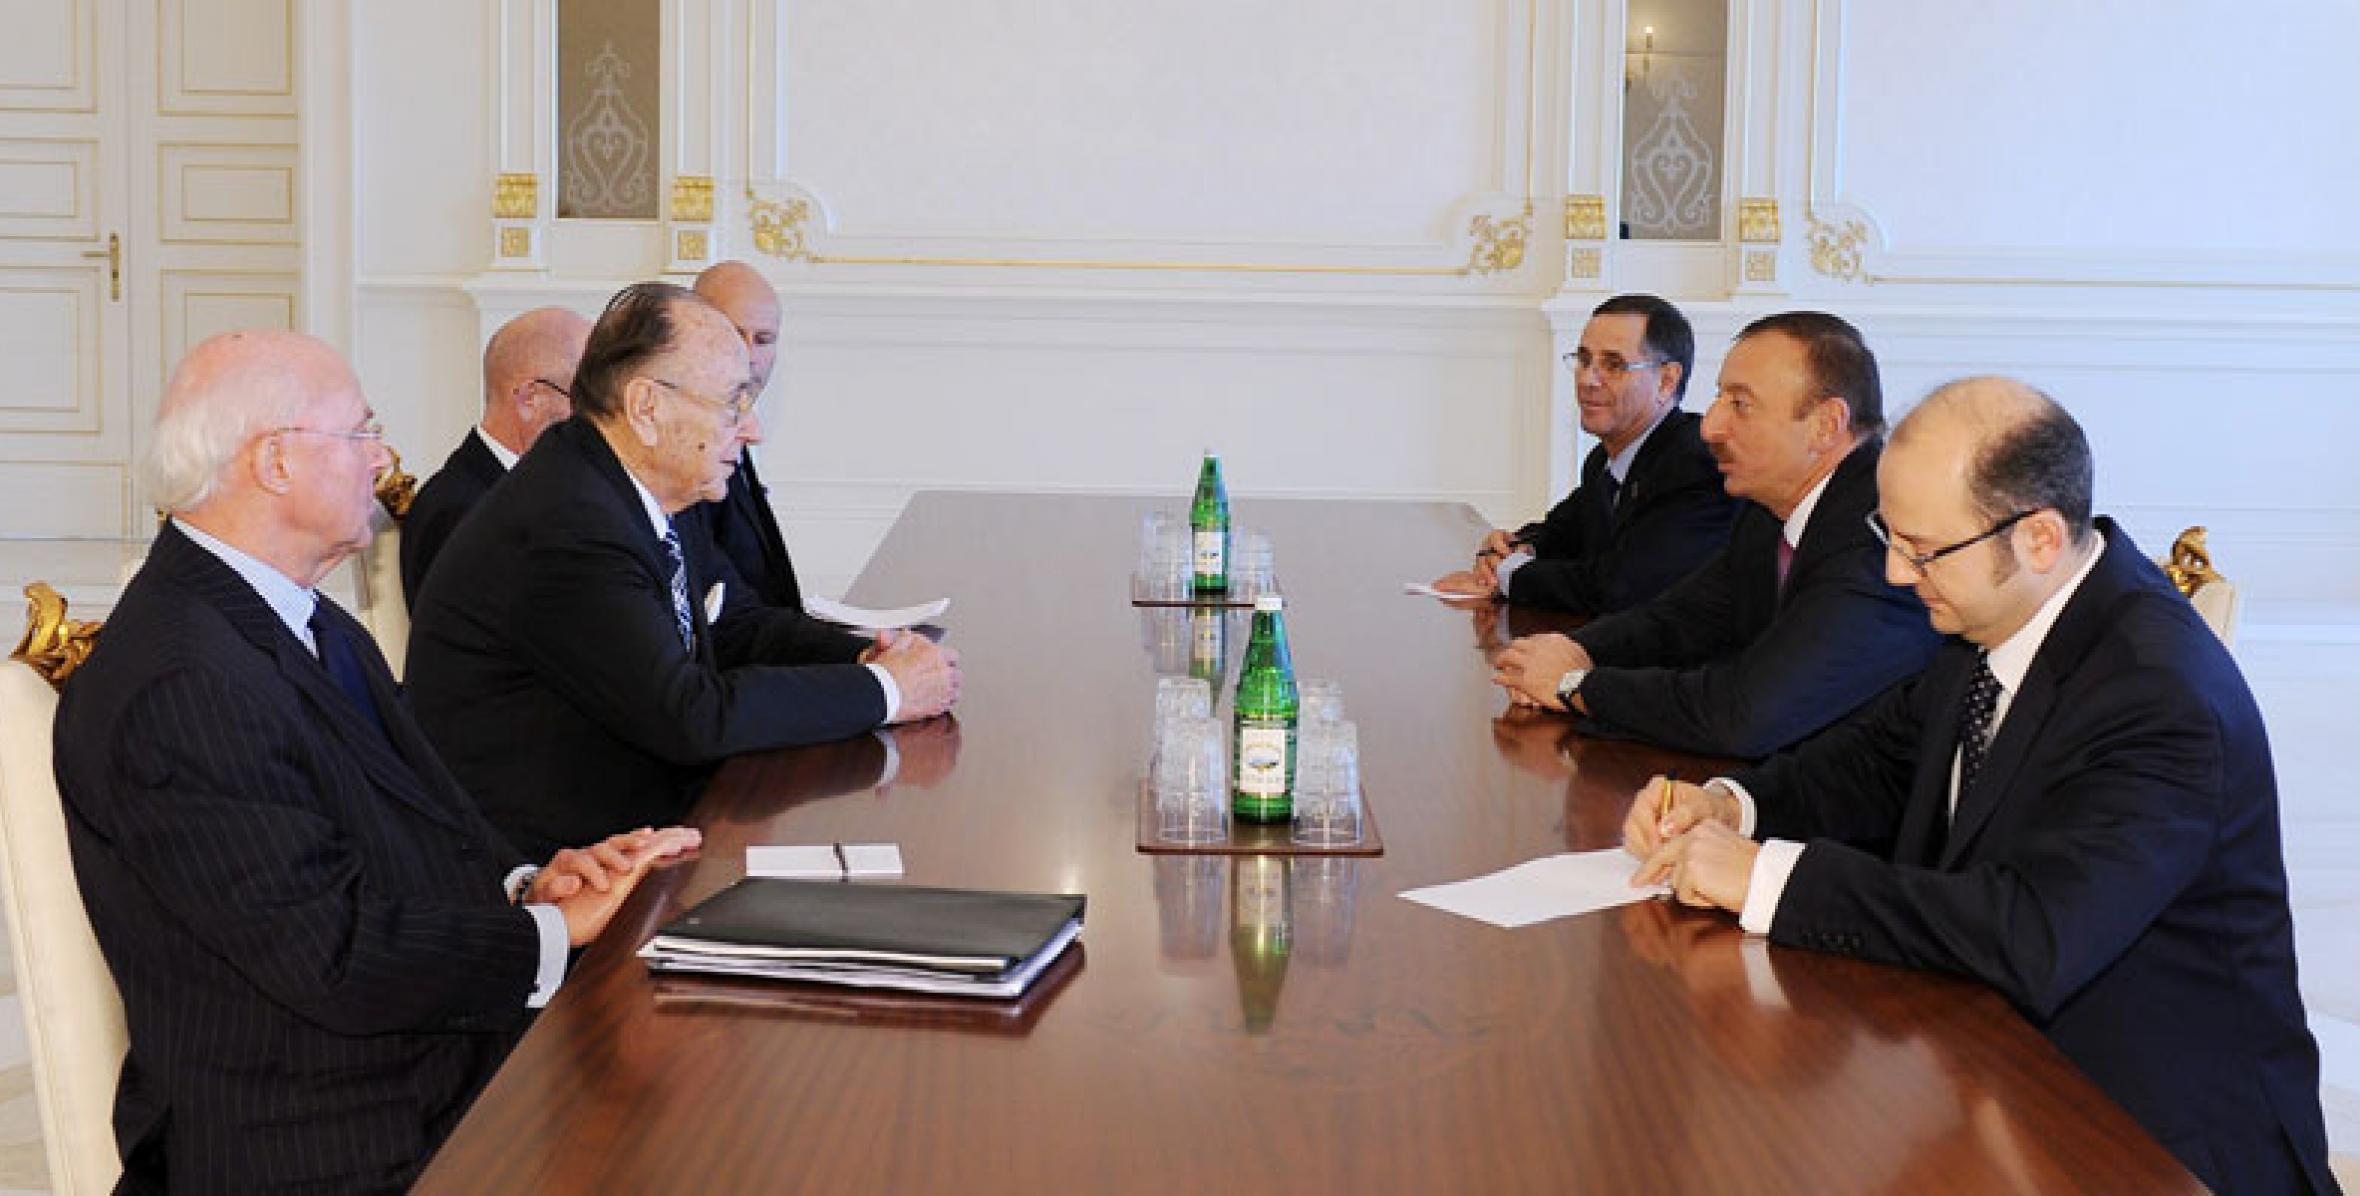 Ilham Aliyev received the former Foreign Minister of Germany, Hans-Dietrich Genscher